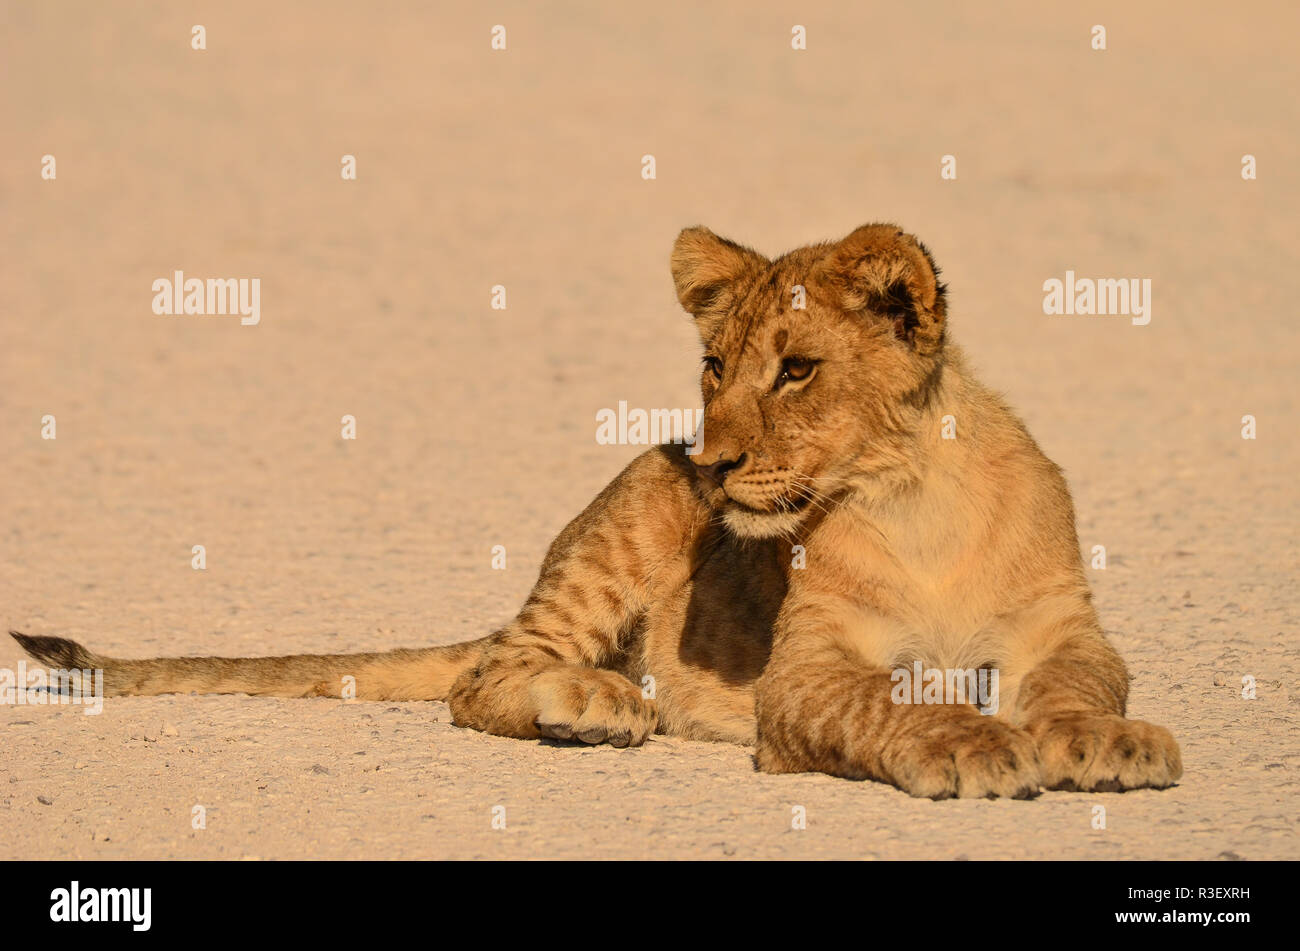 Lion cub in the road Stock Photo